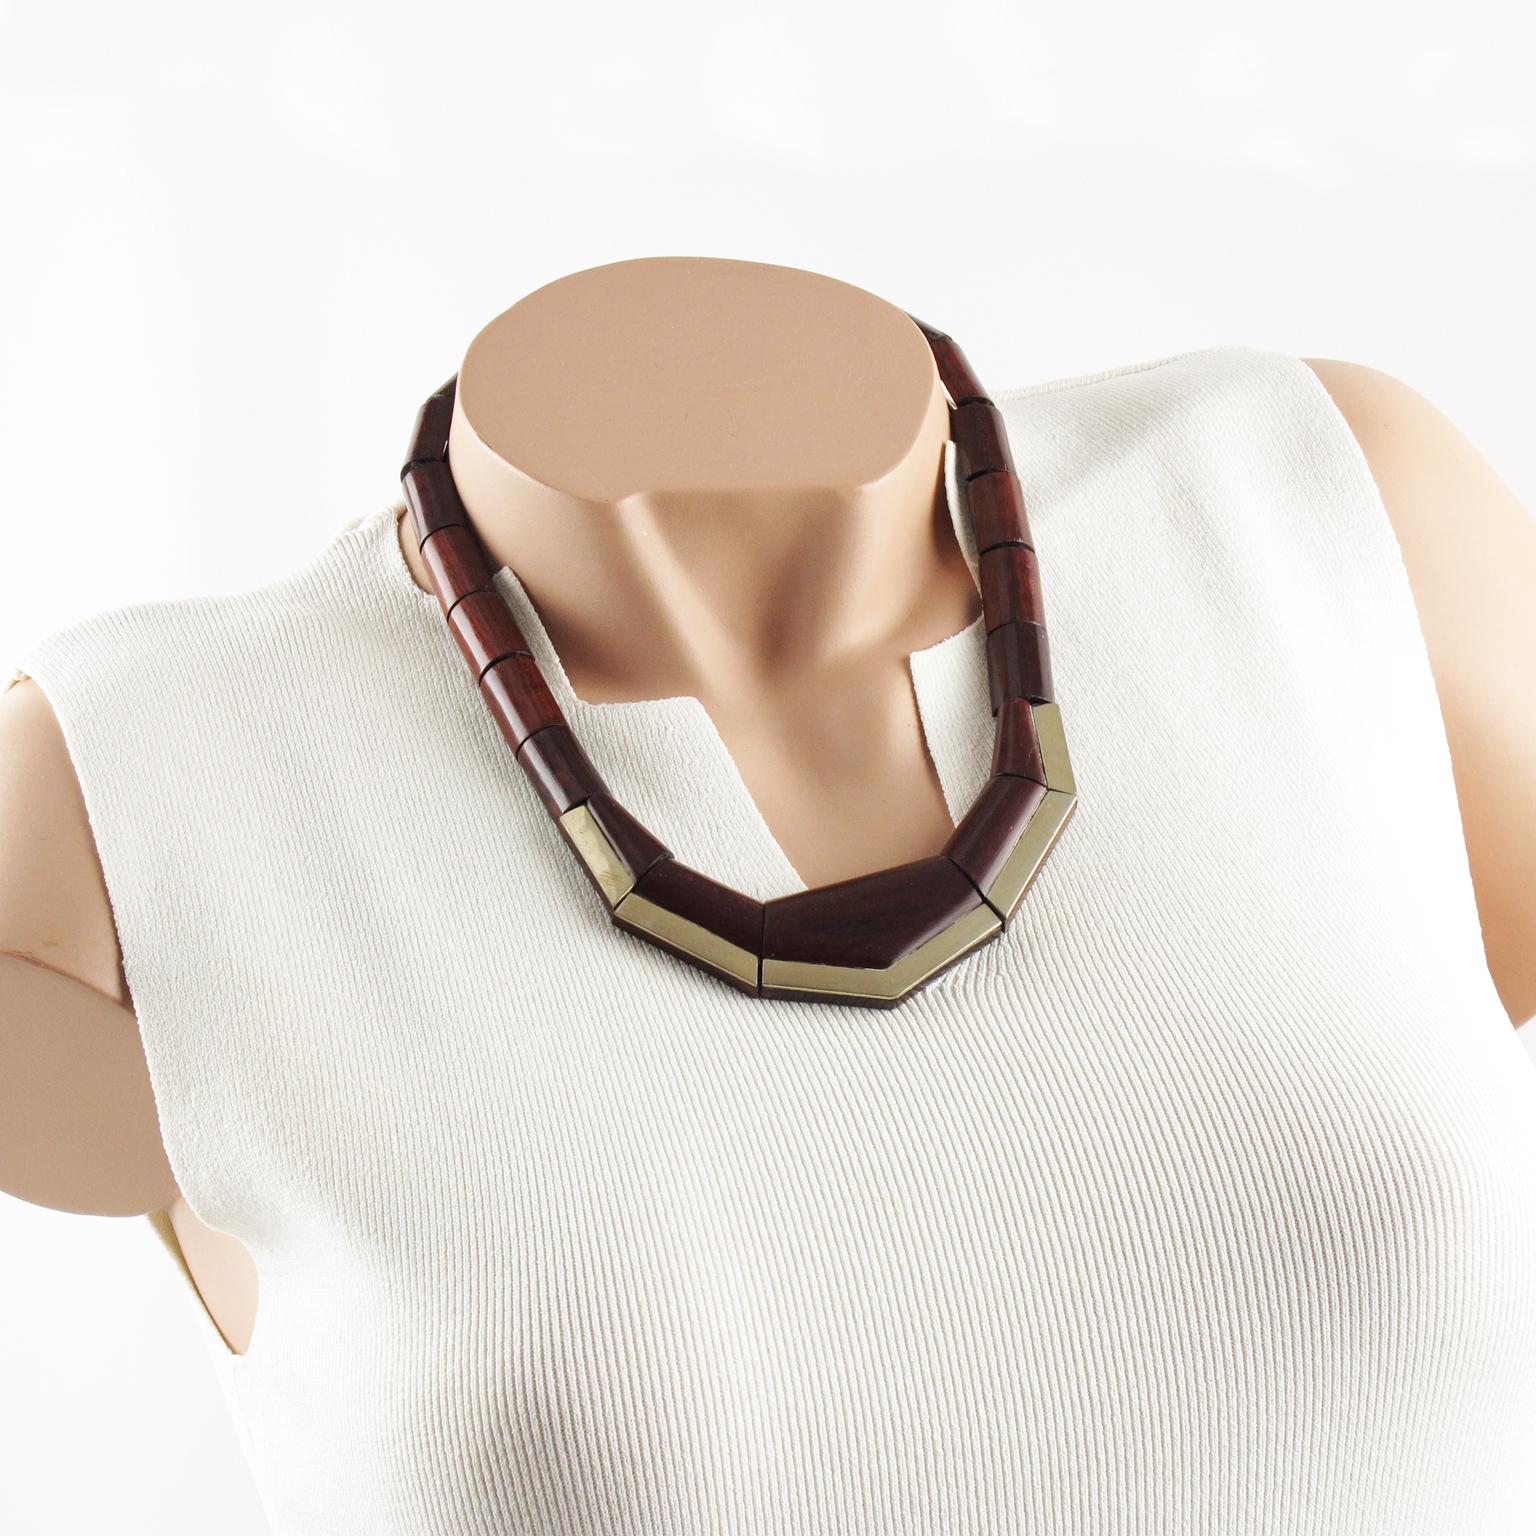 This lovely French Art Deco wood and silver plate geometric bib choker statement necklace features handmade carved and shaped wood elements complemented with geometric silver plate metal accents. The necklace is built on a double silvered metal